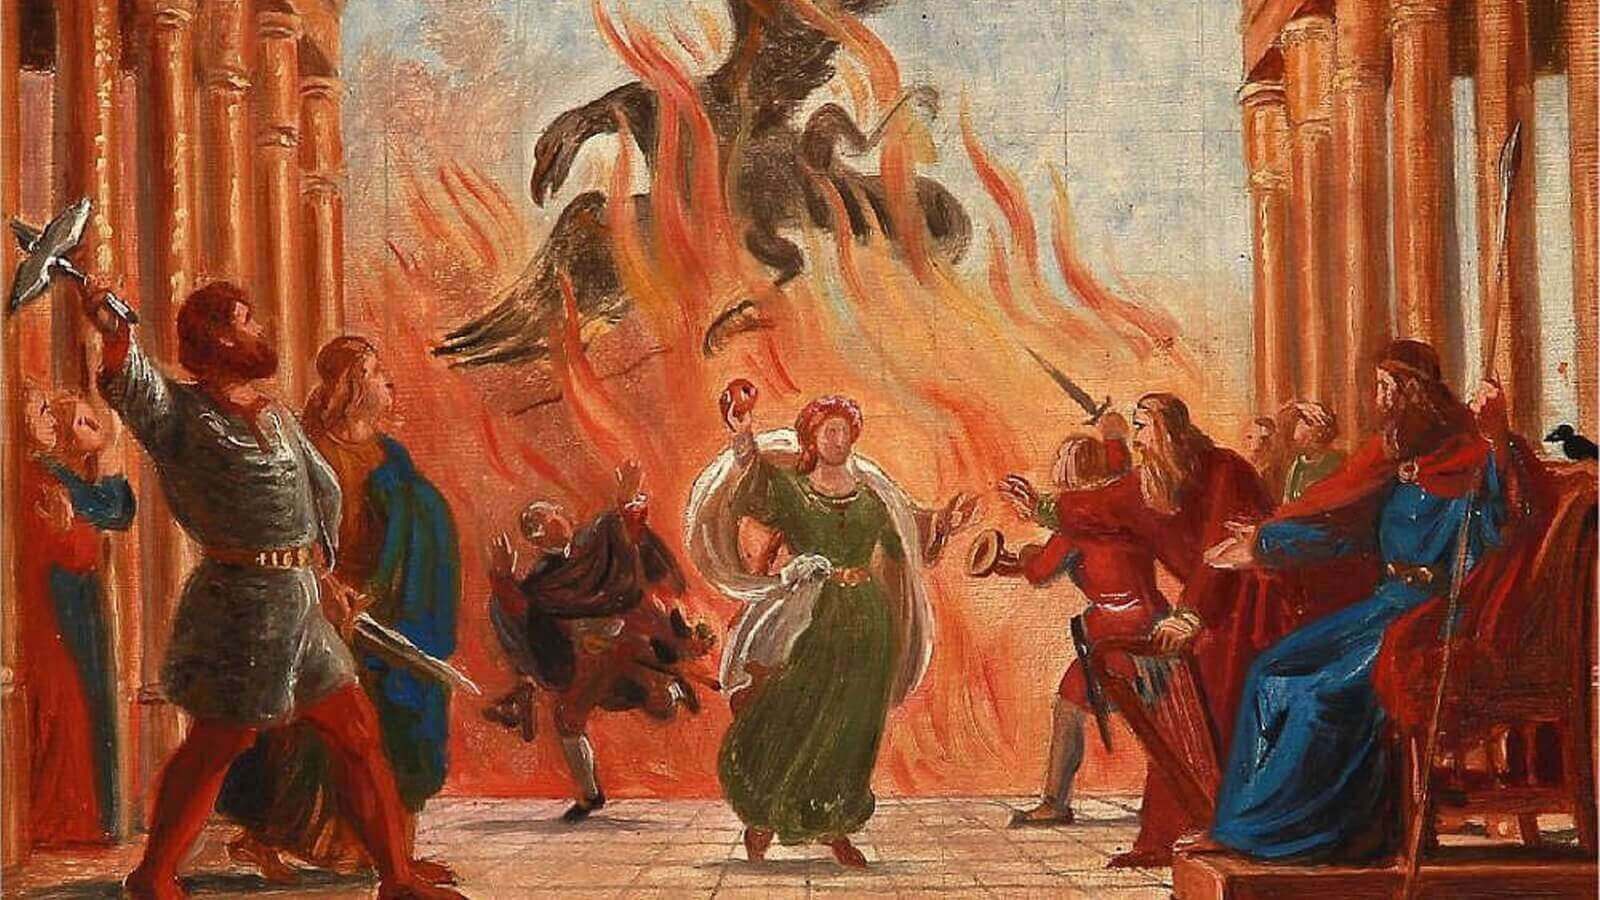 This image depicts Idun in a green dress, holding an apple above her head while standing among the gods. A chaotic fire blazes behind her.